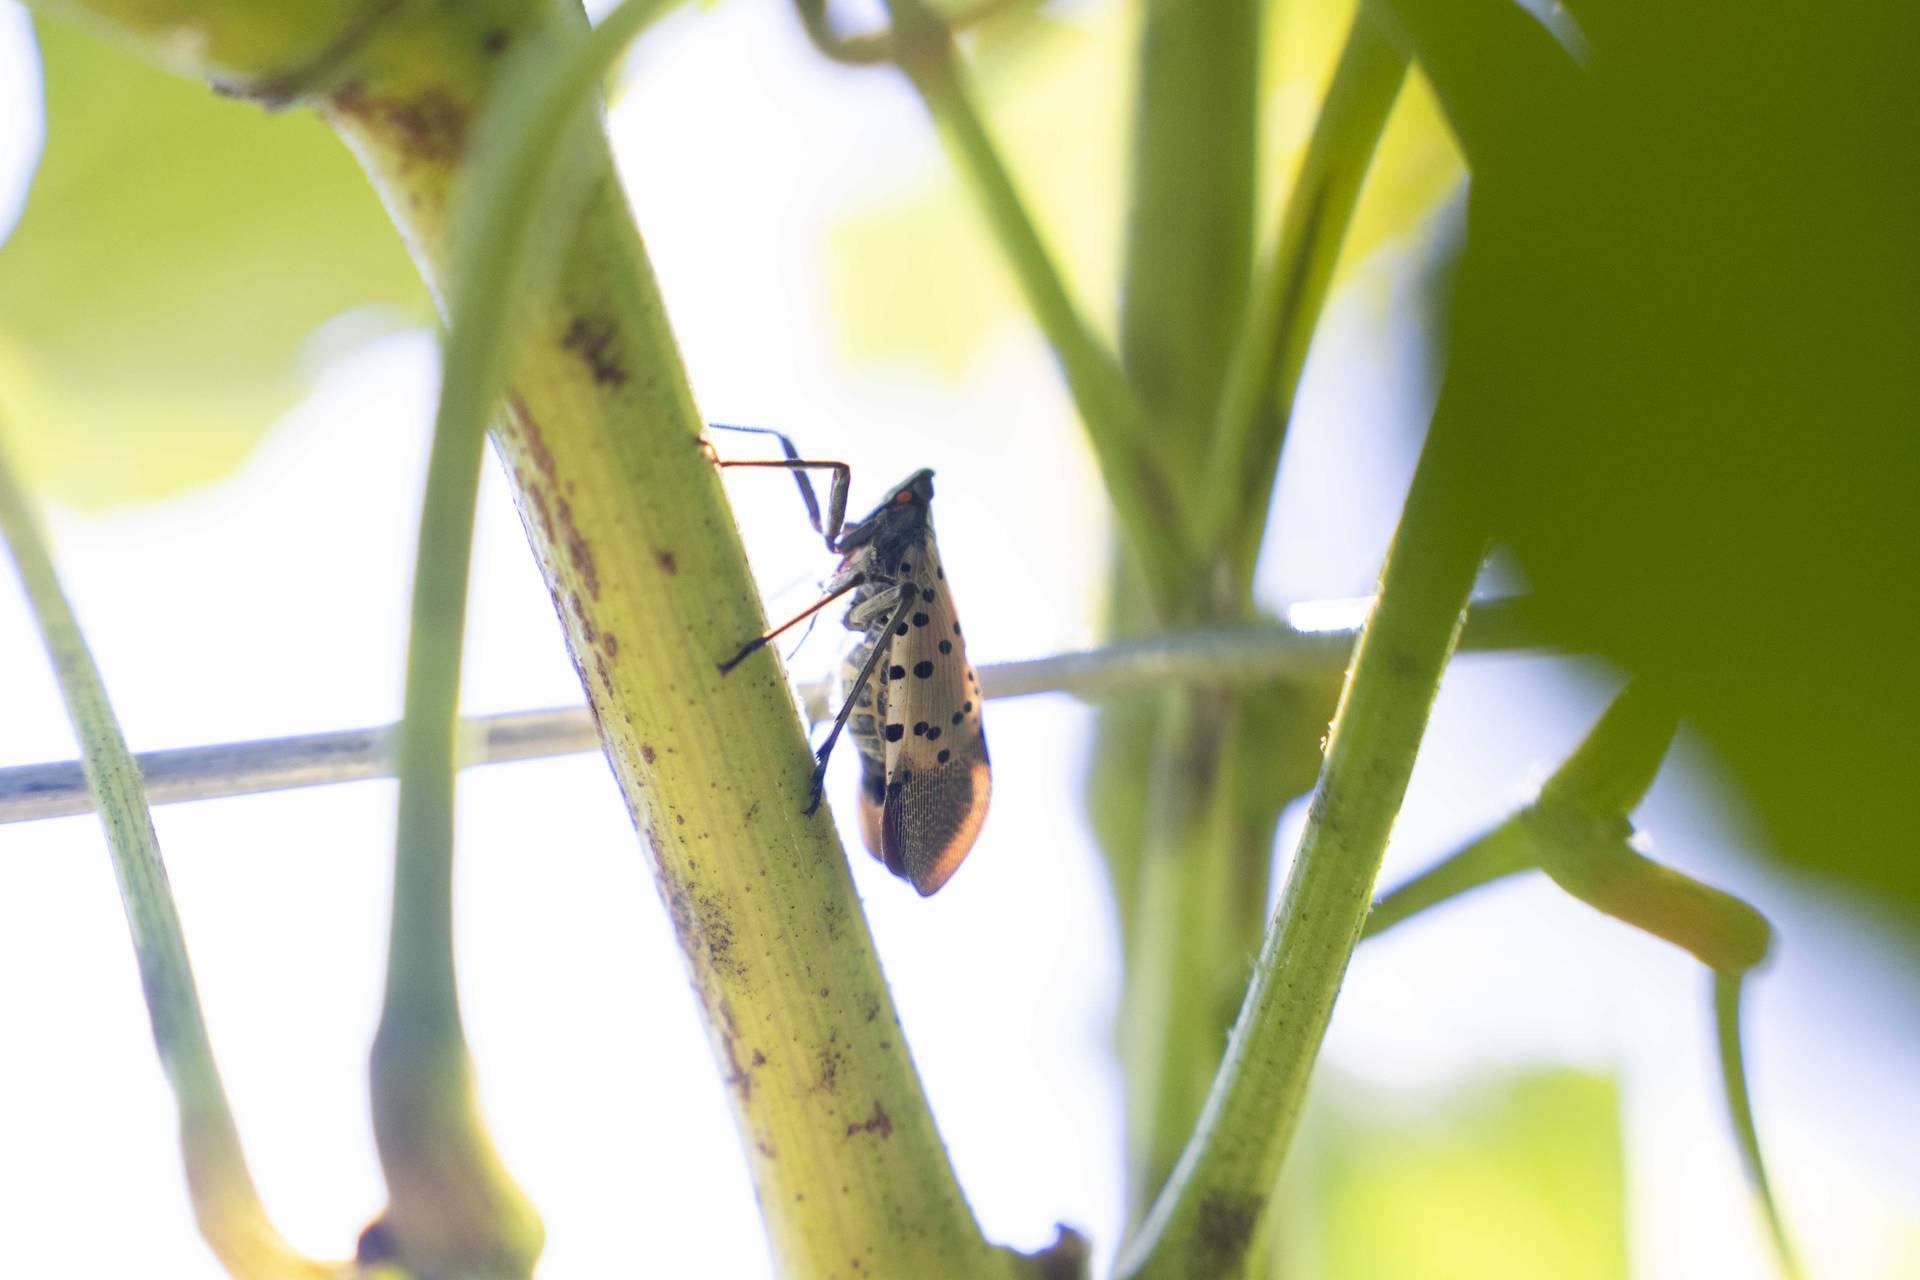 Invasive spotted lanternflies are appearing all over Maryland and pose a particular threat to grape vines.